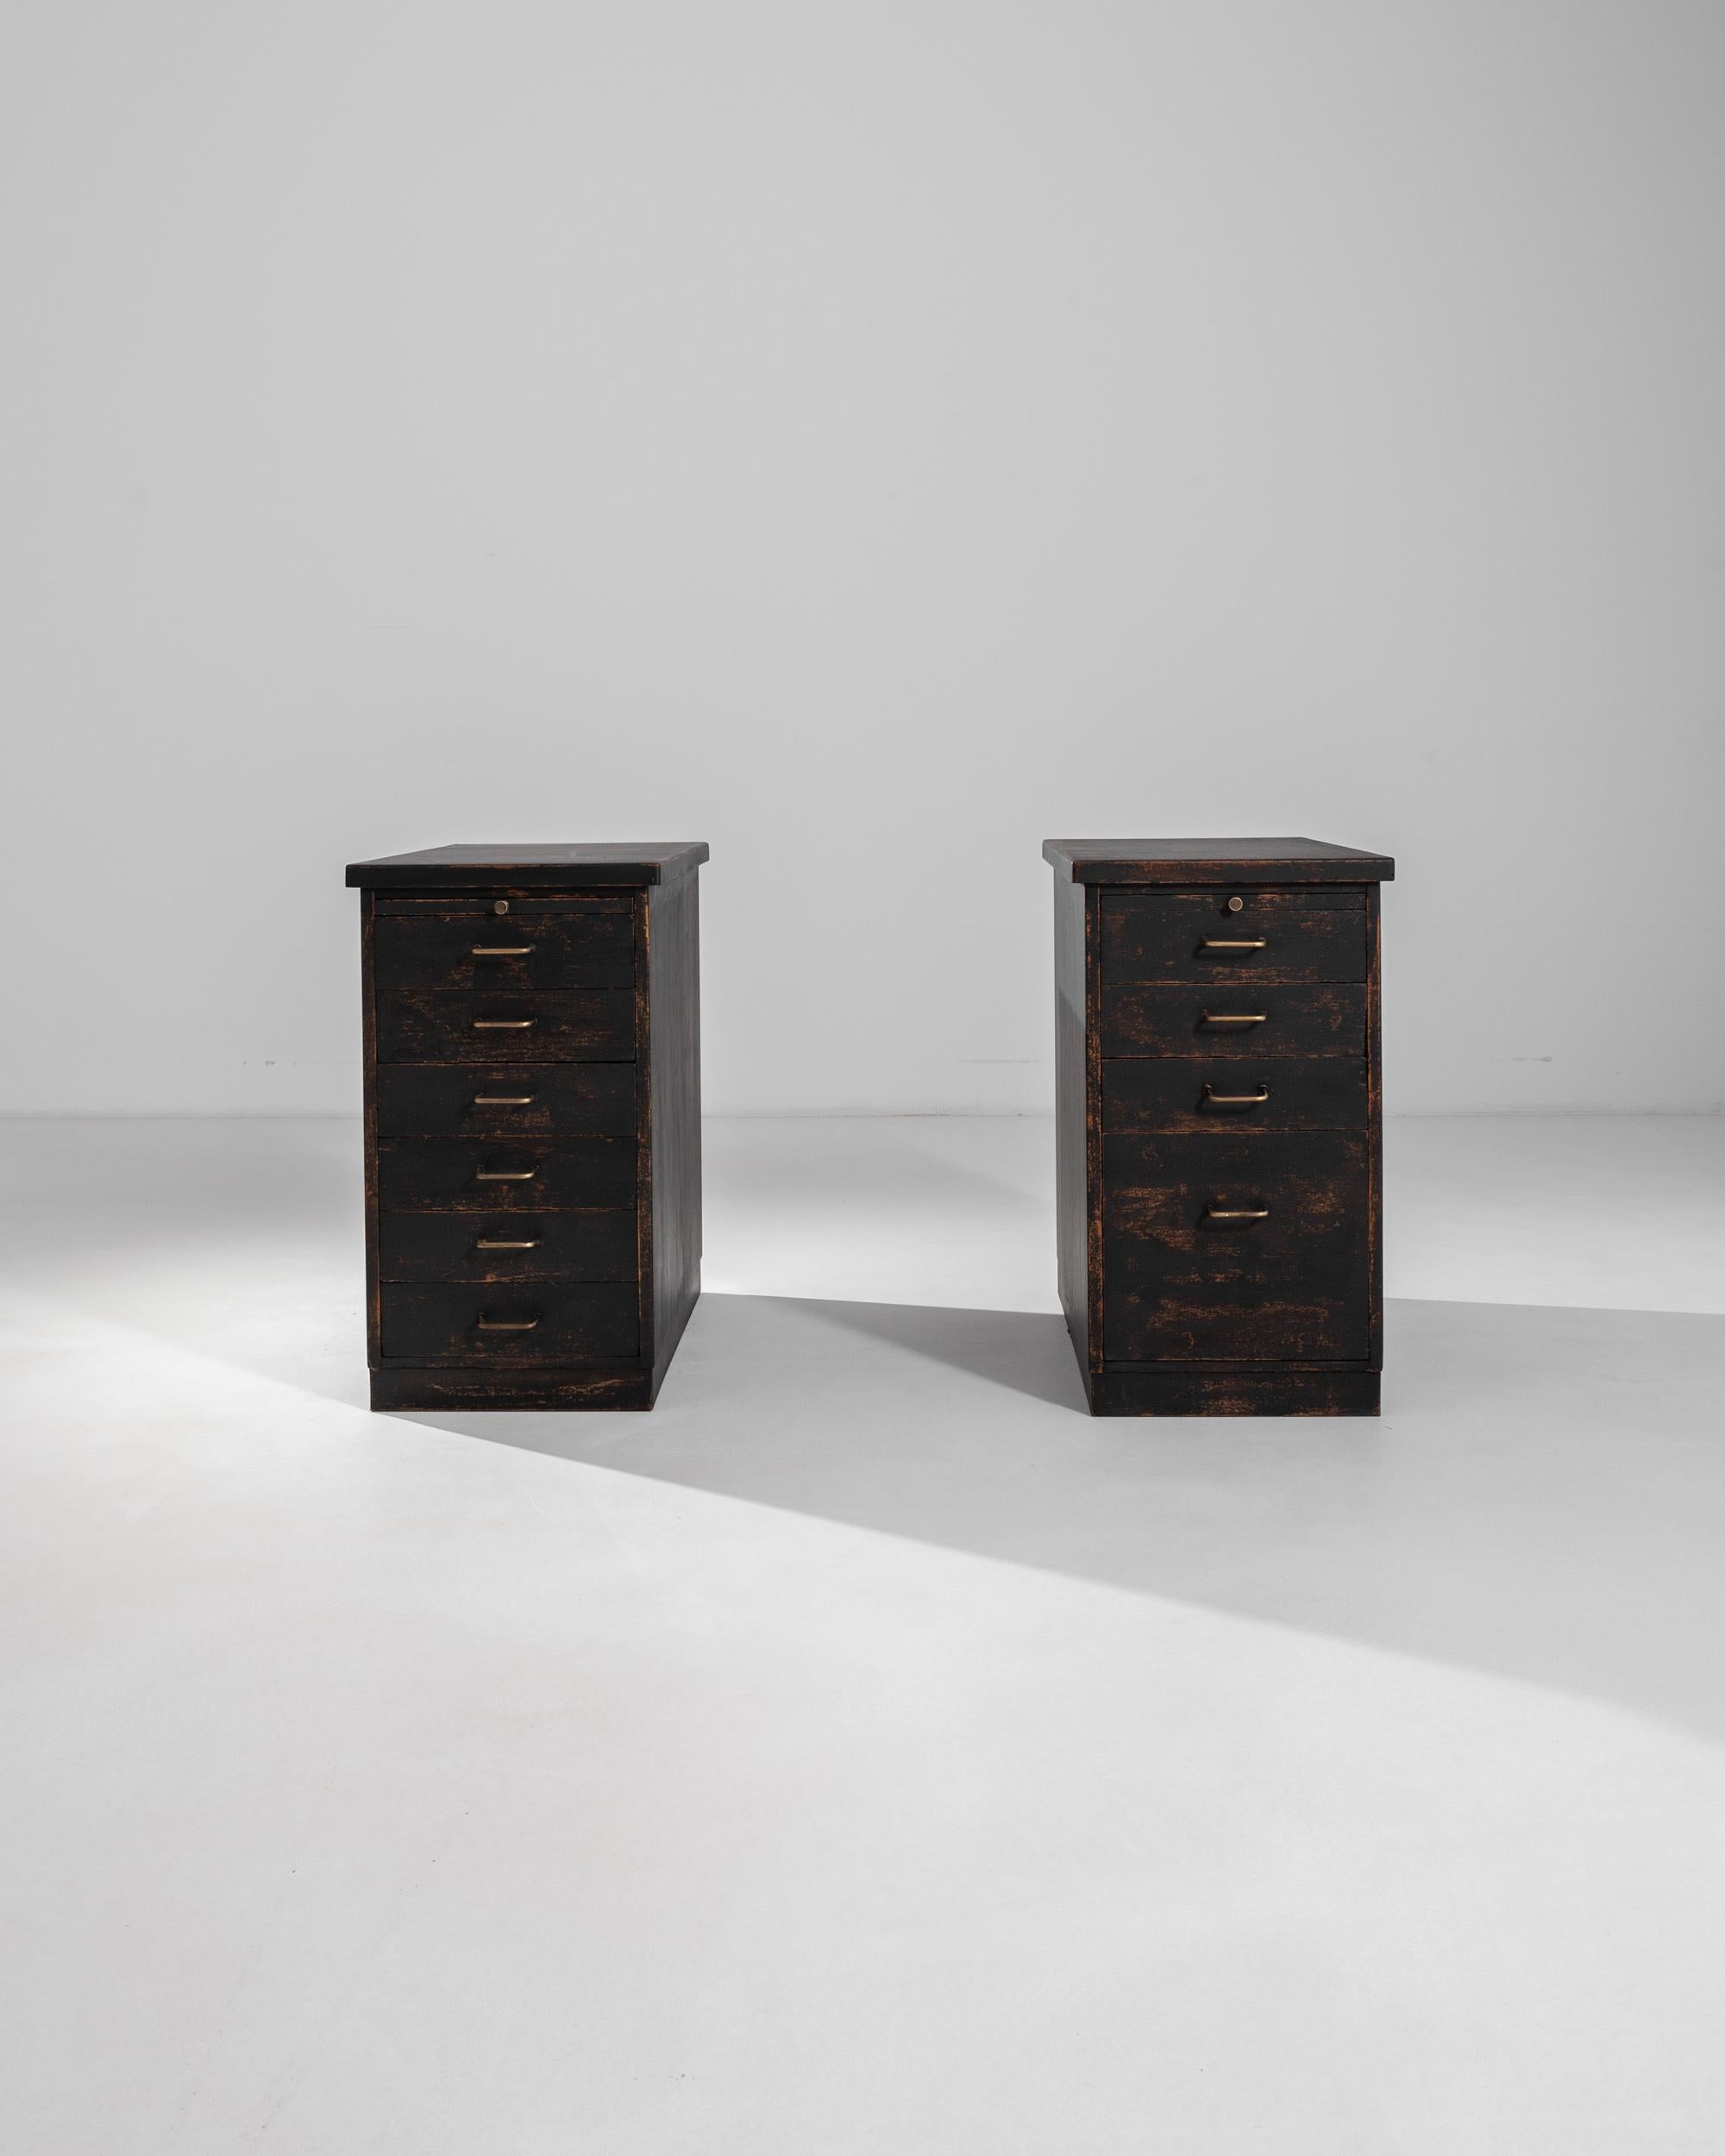 A pair of 19th century wooden drawer cabinets, this patinated ensemble features each one an arrangement of six and four drawers, topped by a practical retractable surface. Elevated at two feet and a half, the wooden chest of drawers exhibit a dark